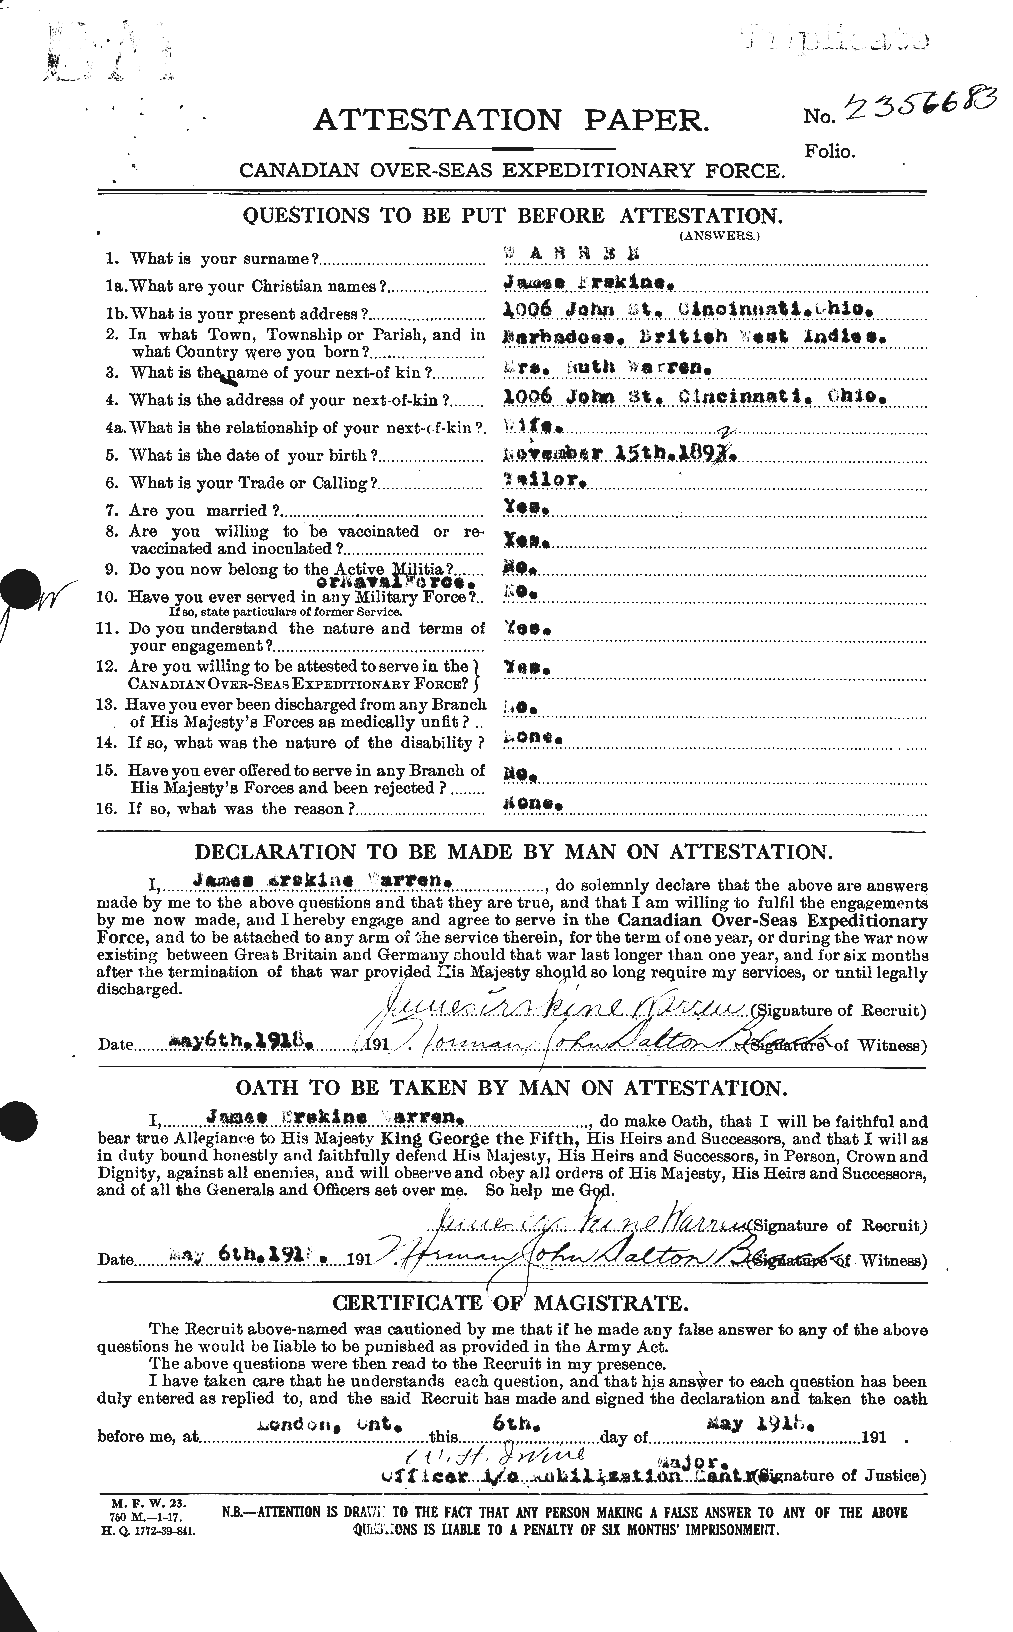 Personnel Records of the First World War - CEF 658390a